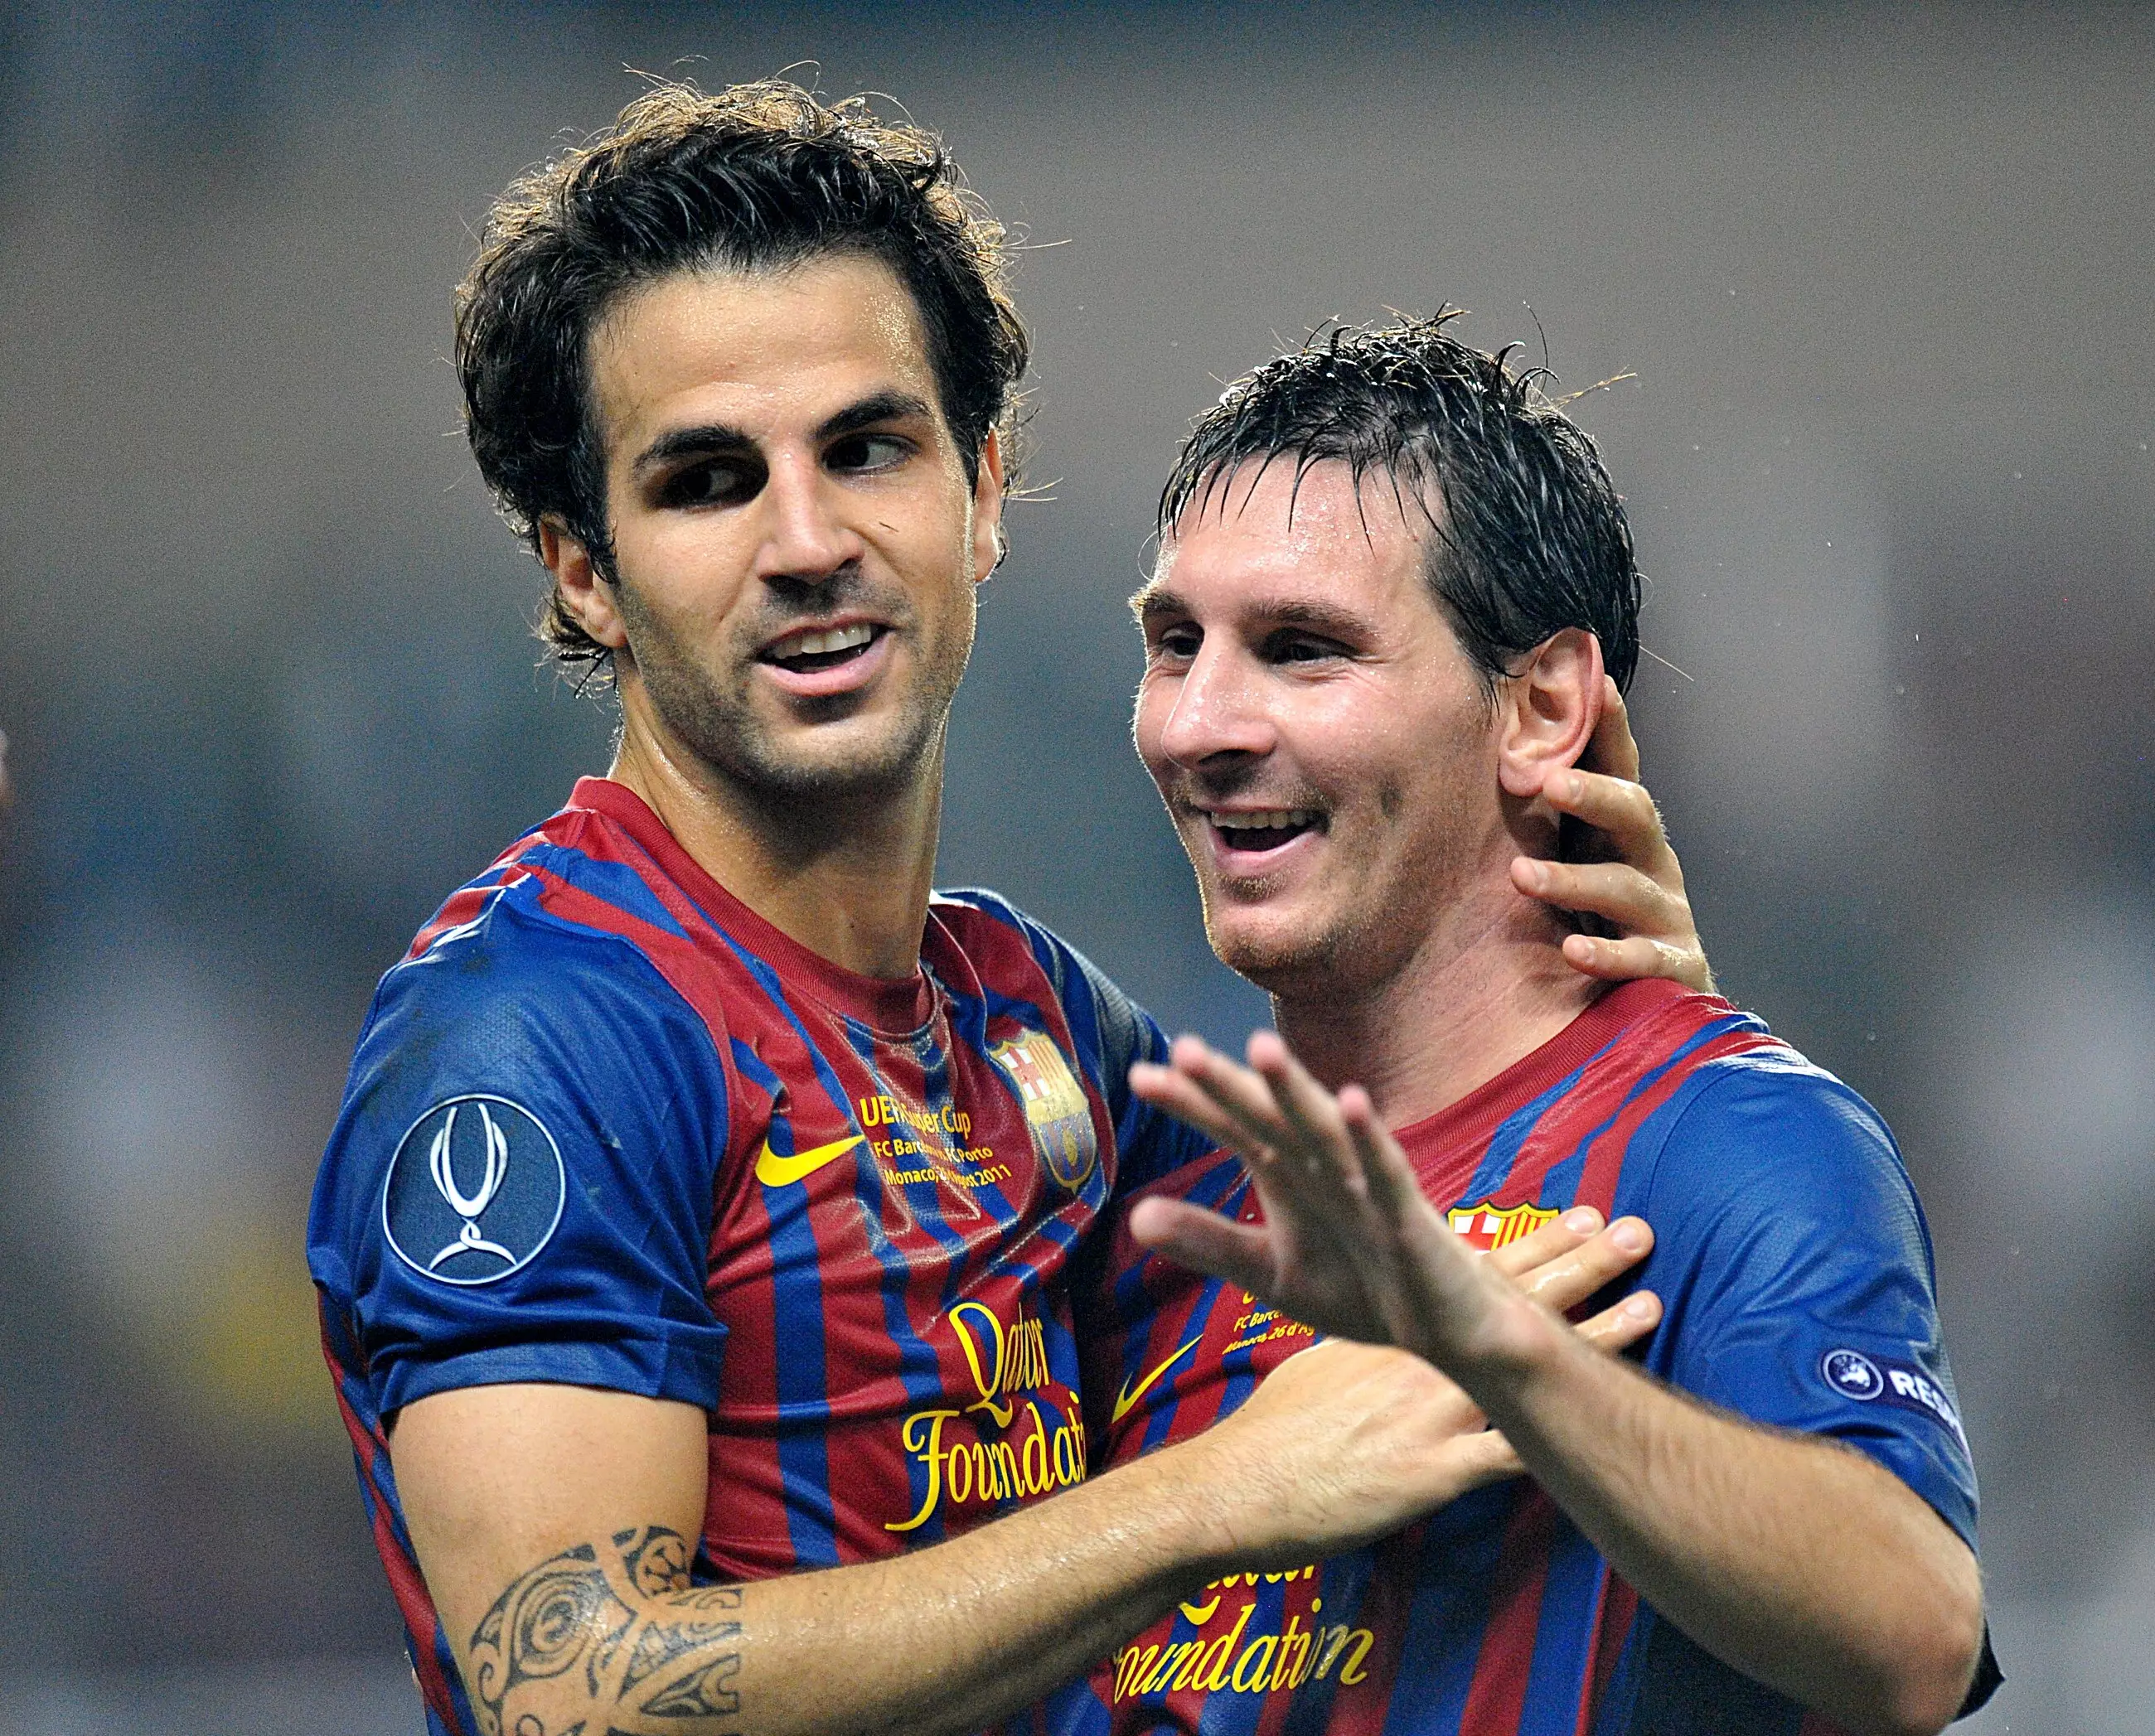 Fabregas left Barcelona for Arsenal but returned to play alongside his friend. Image: PA Images